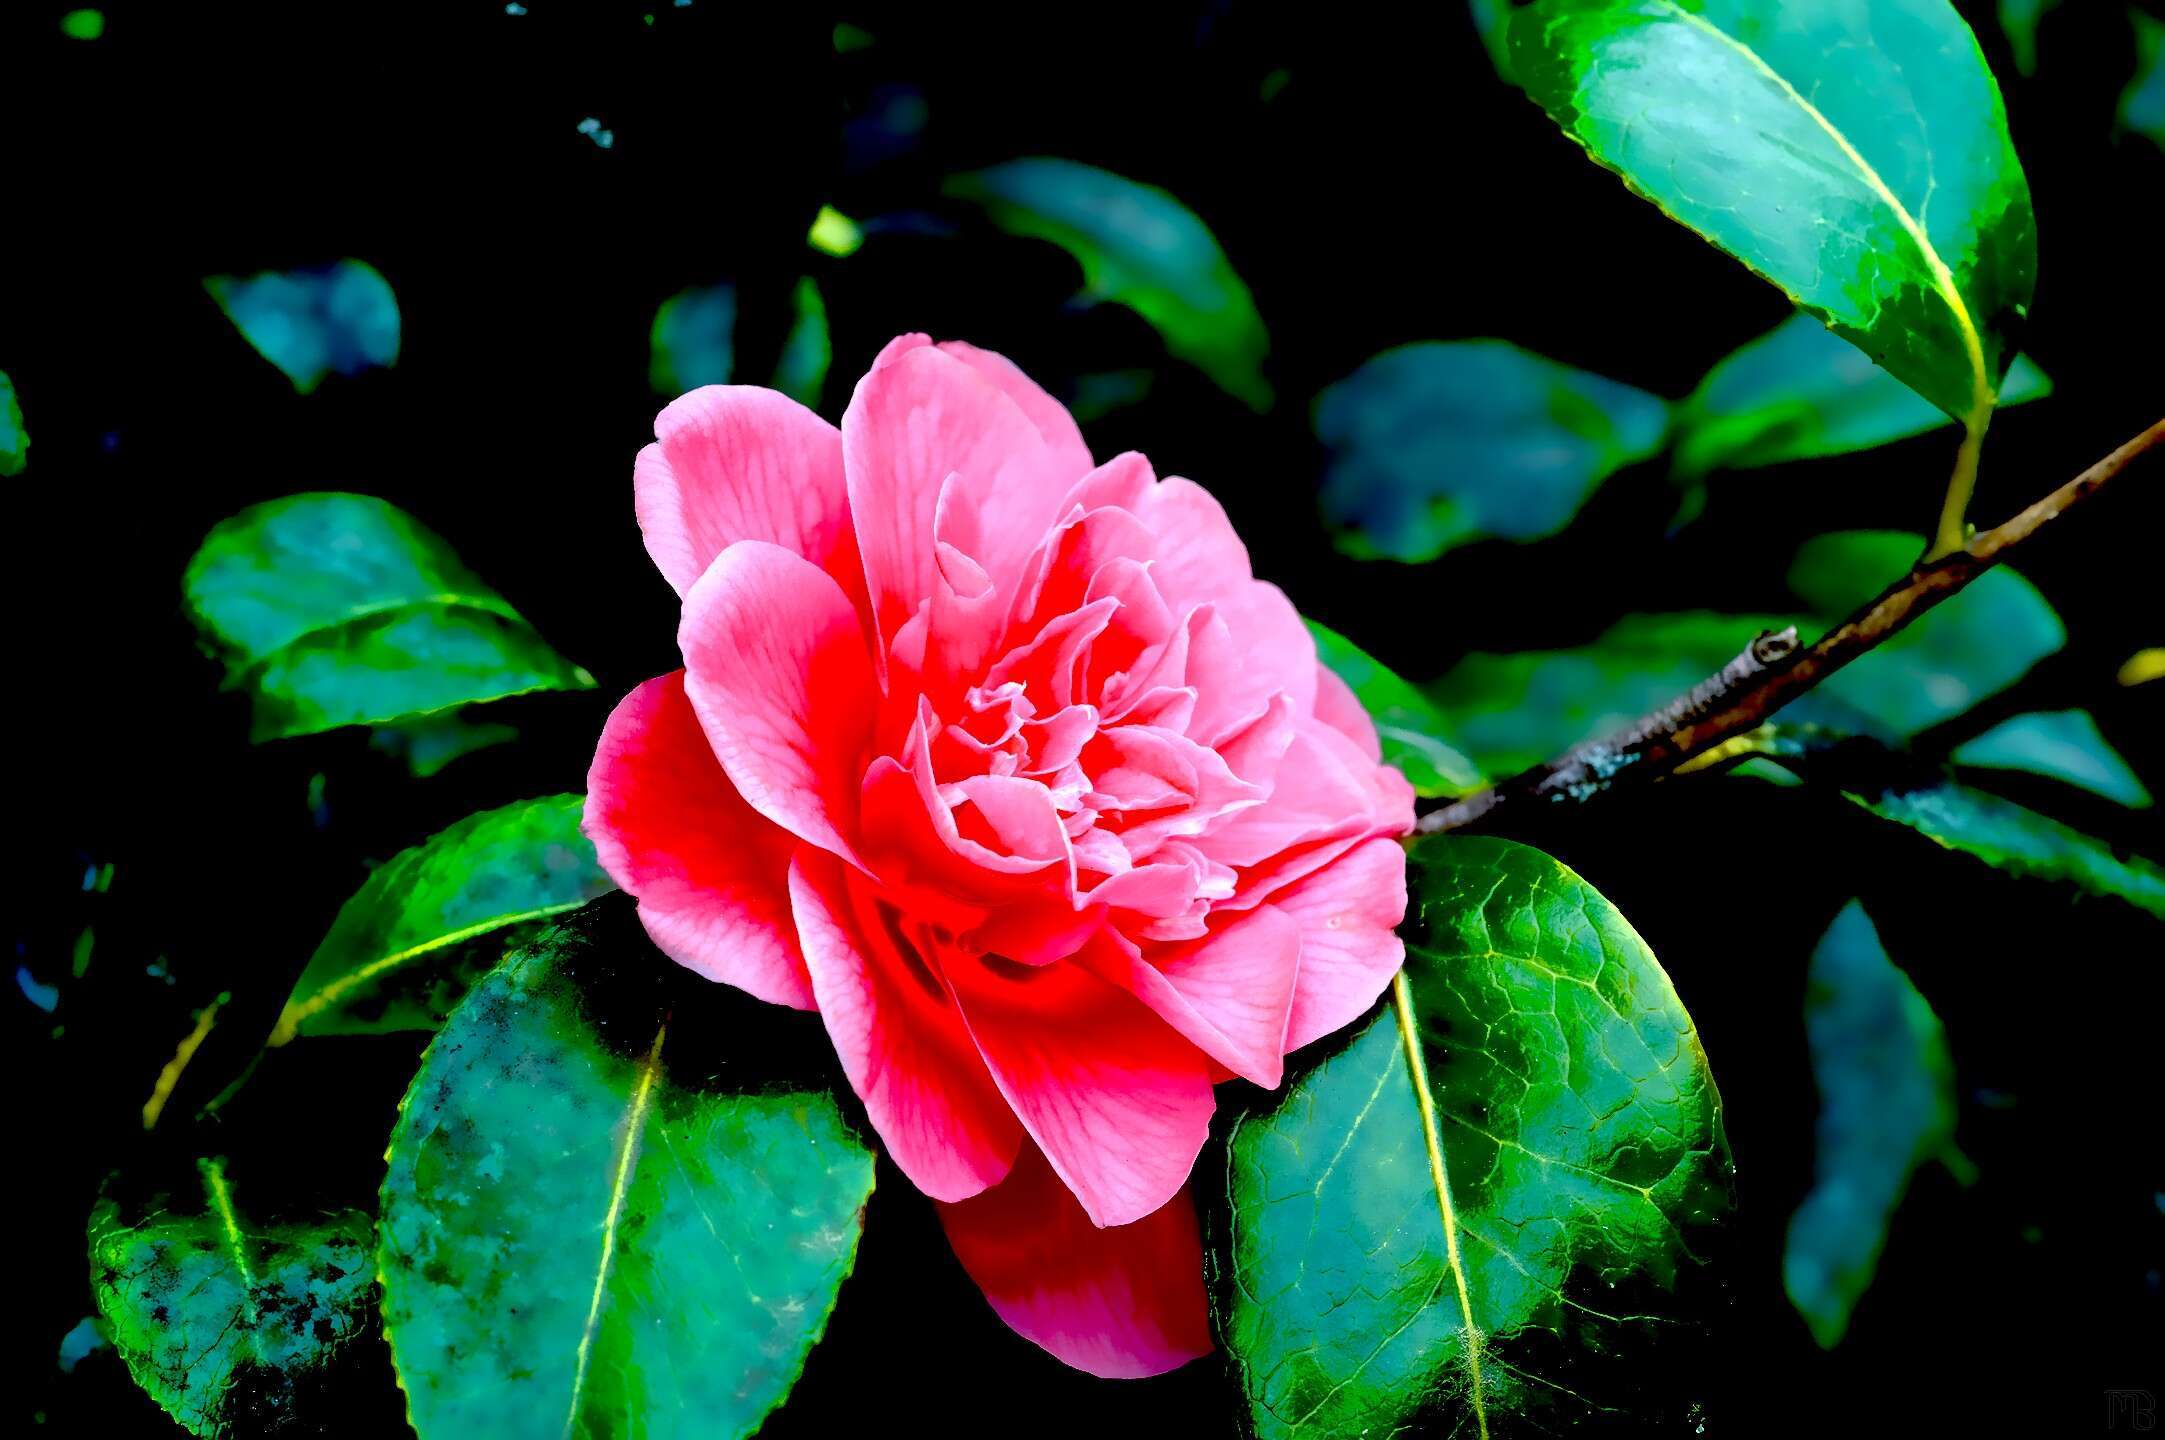 Arty pink flower with green leaves